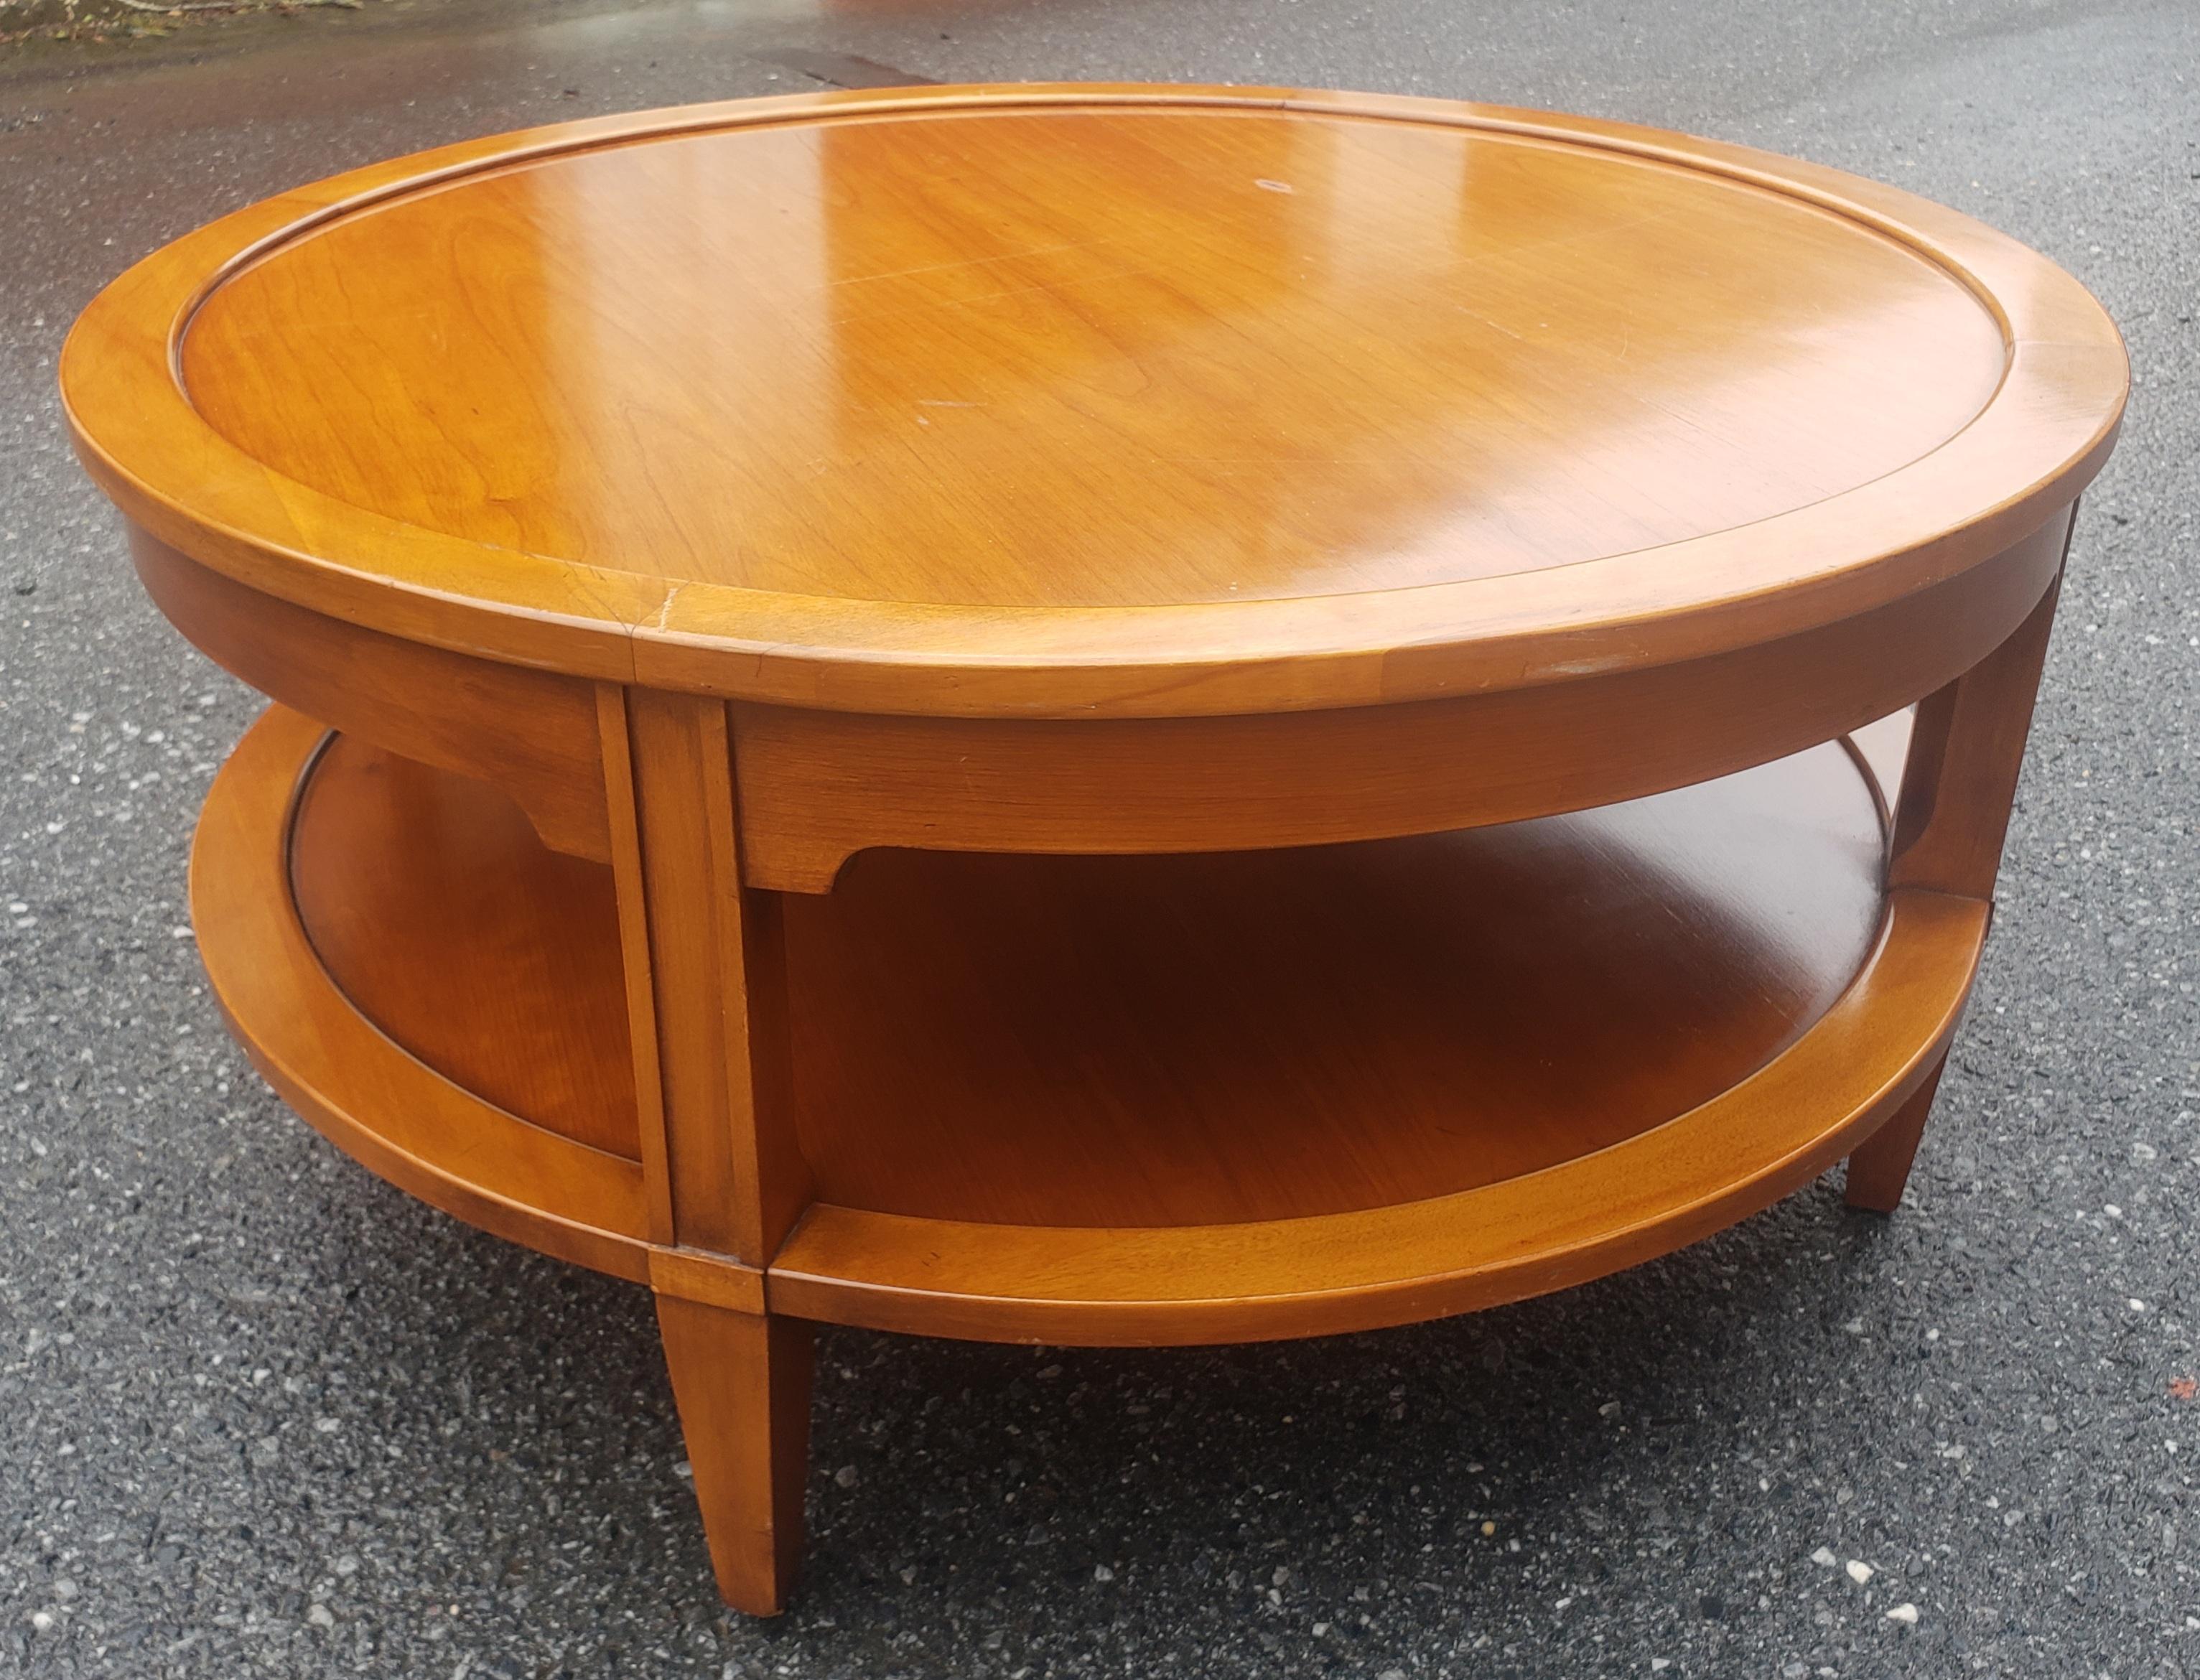 A MId-Century Fruitwood Two-Tier Coffee Table or Cocktail Table in good vintage condition. Measures 34.5